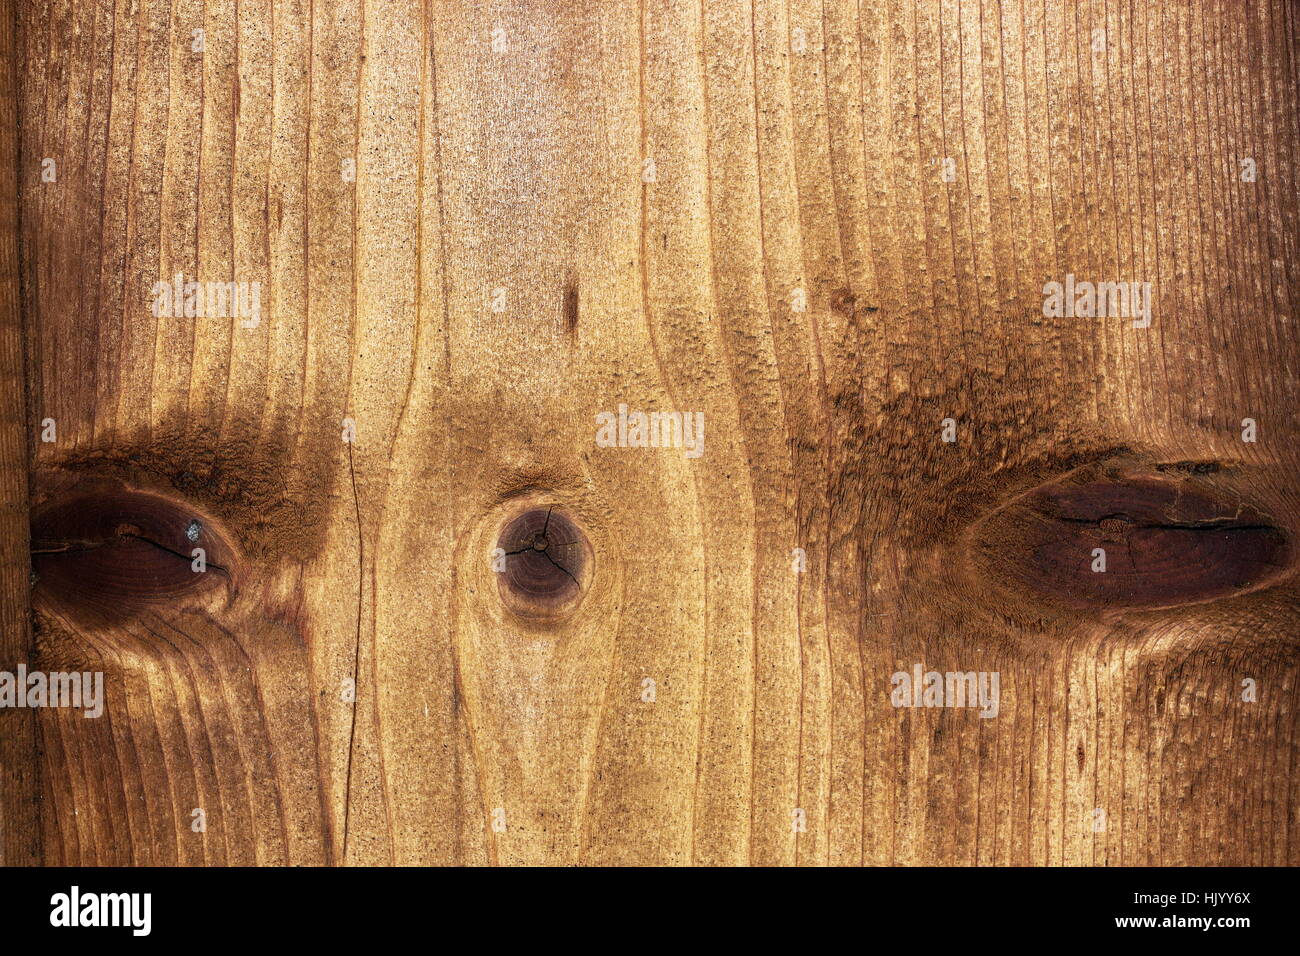 fir wood texture with knots, wooden plank closeup ready for your design Stock Photo